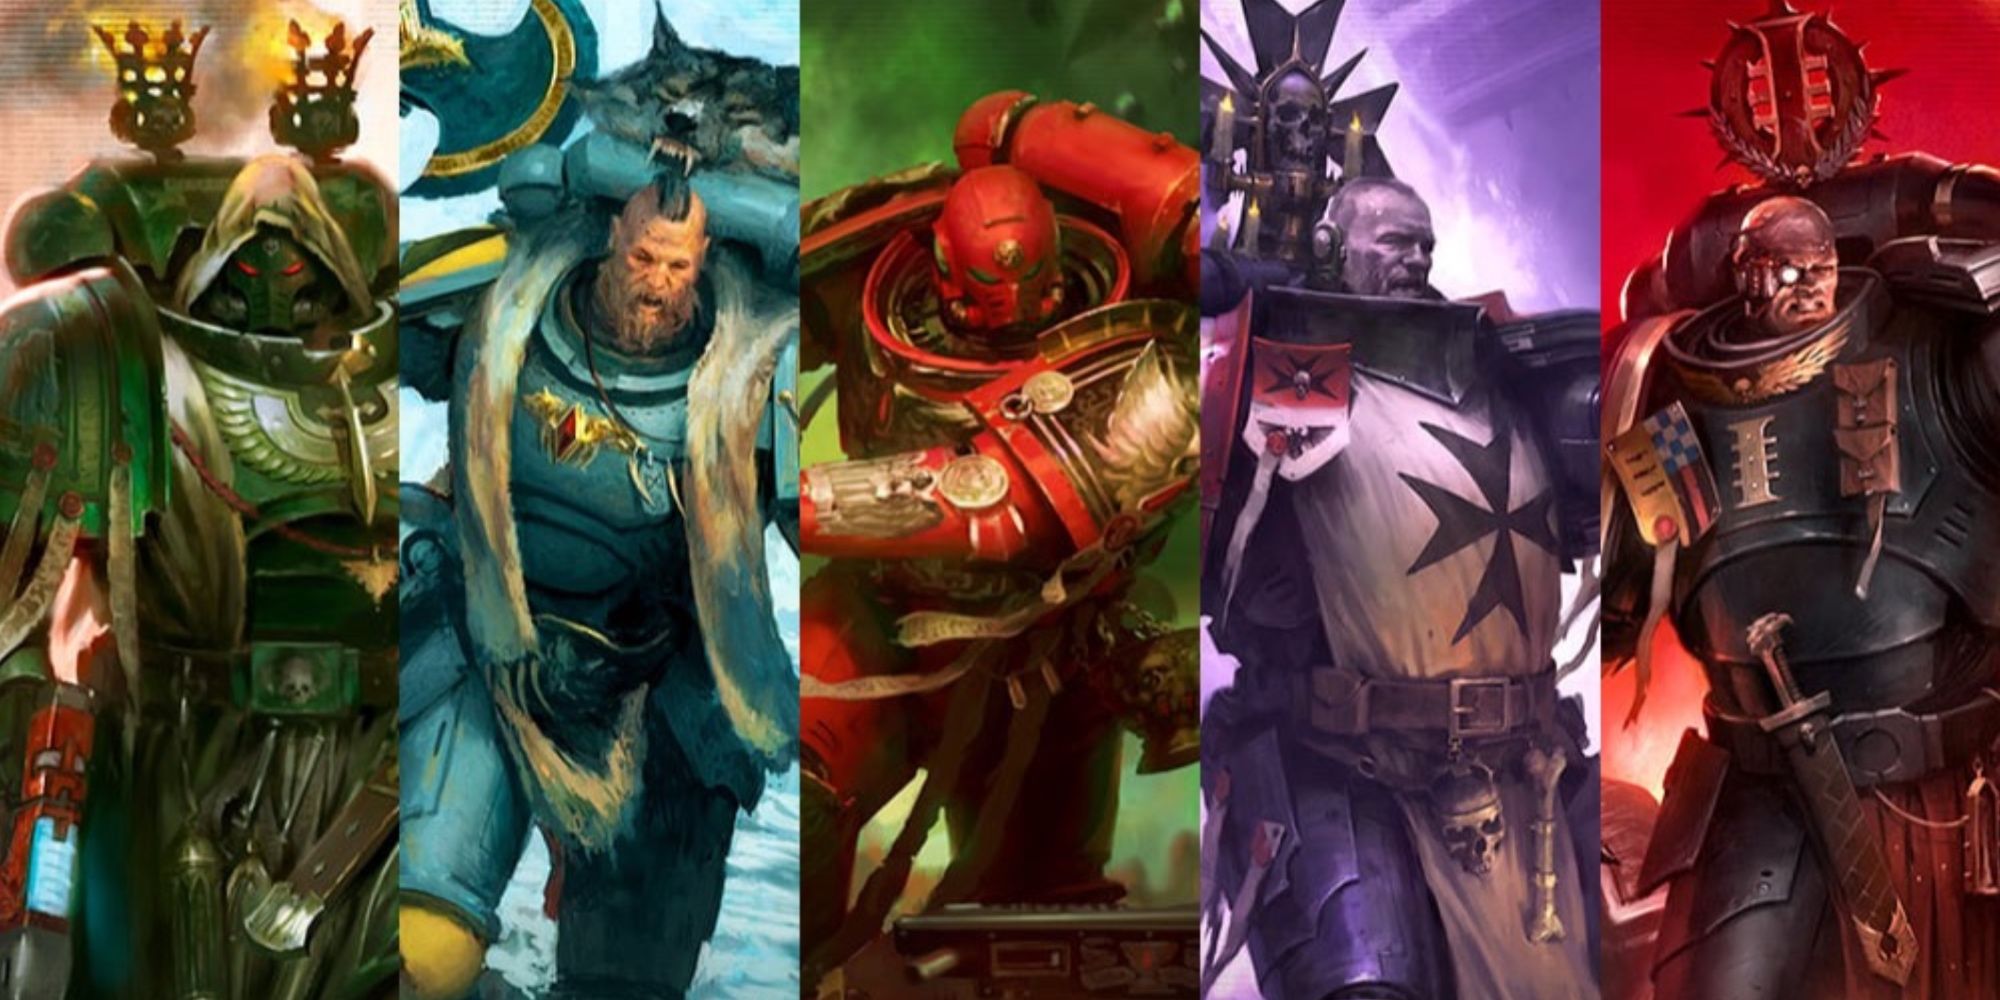 Warhammer 40k: 7 Reasons To Play Space Marines A Dark Angel, Space Wolf, Blood Angel, Black Templar and other Space Marine 